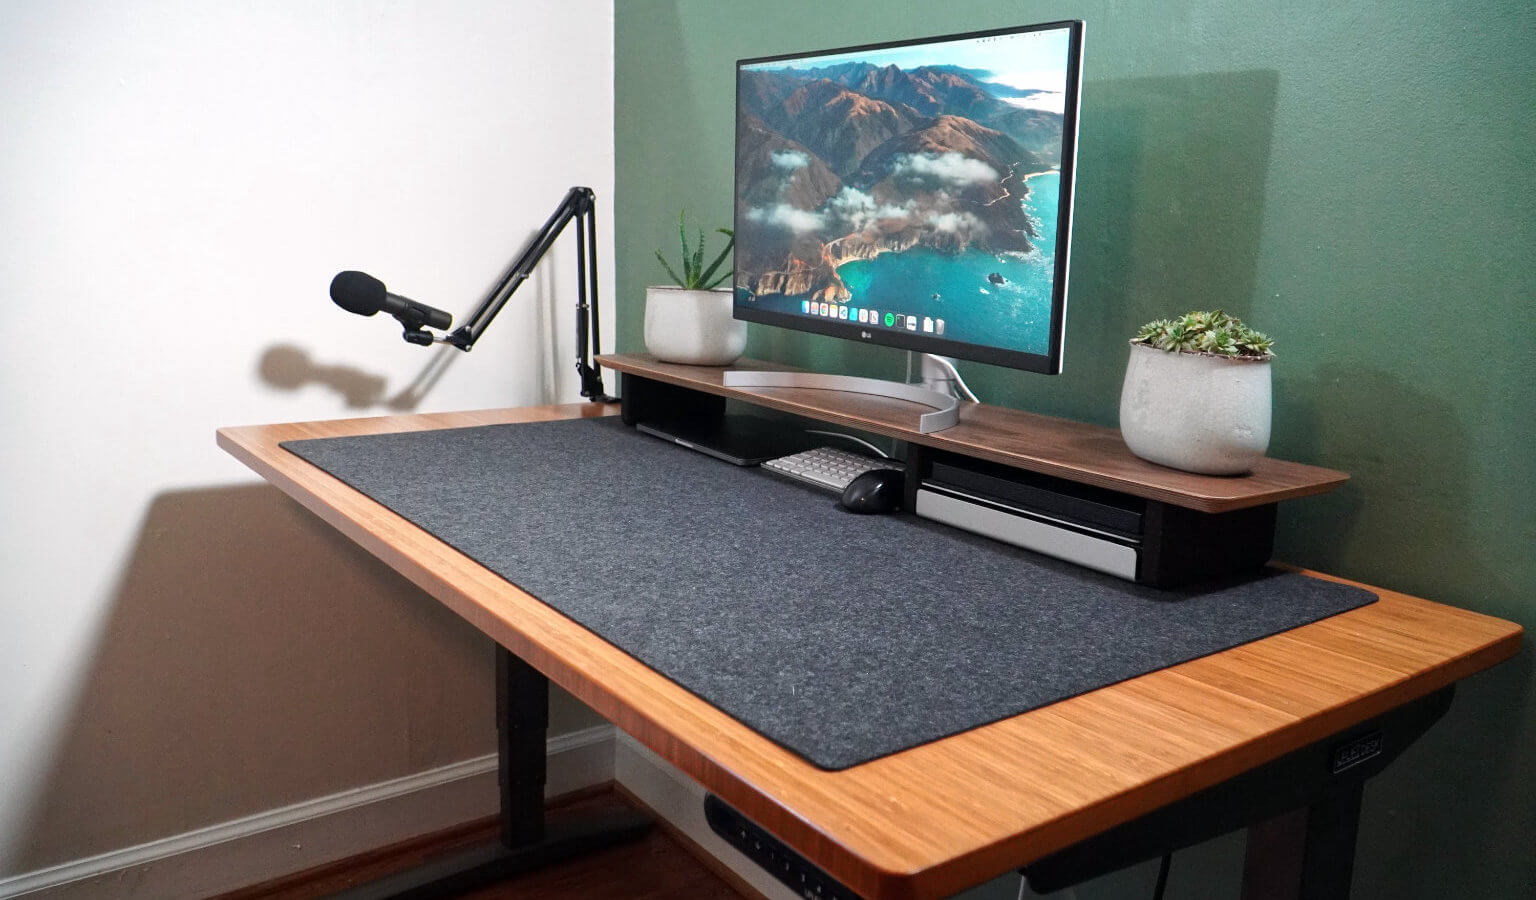 How the Grovemade Desk Pad Transformed My Home Office: A Review